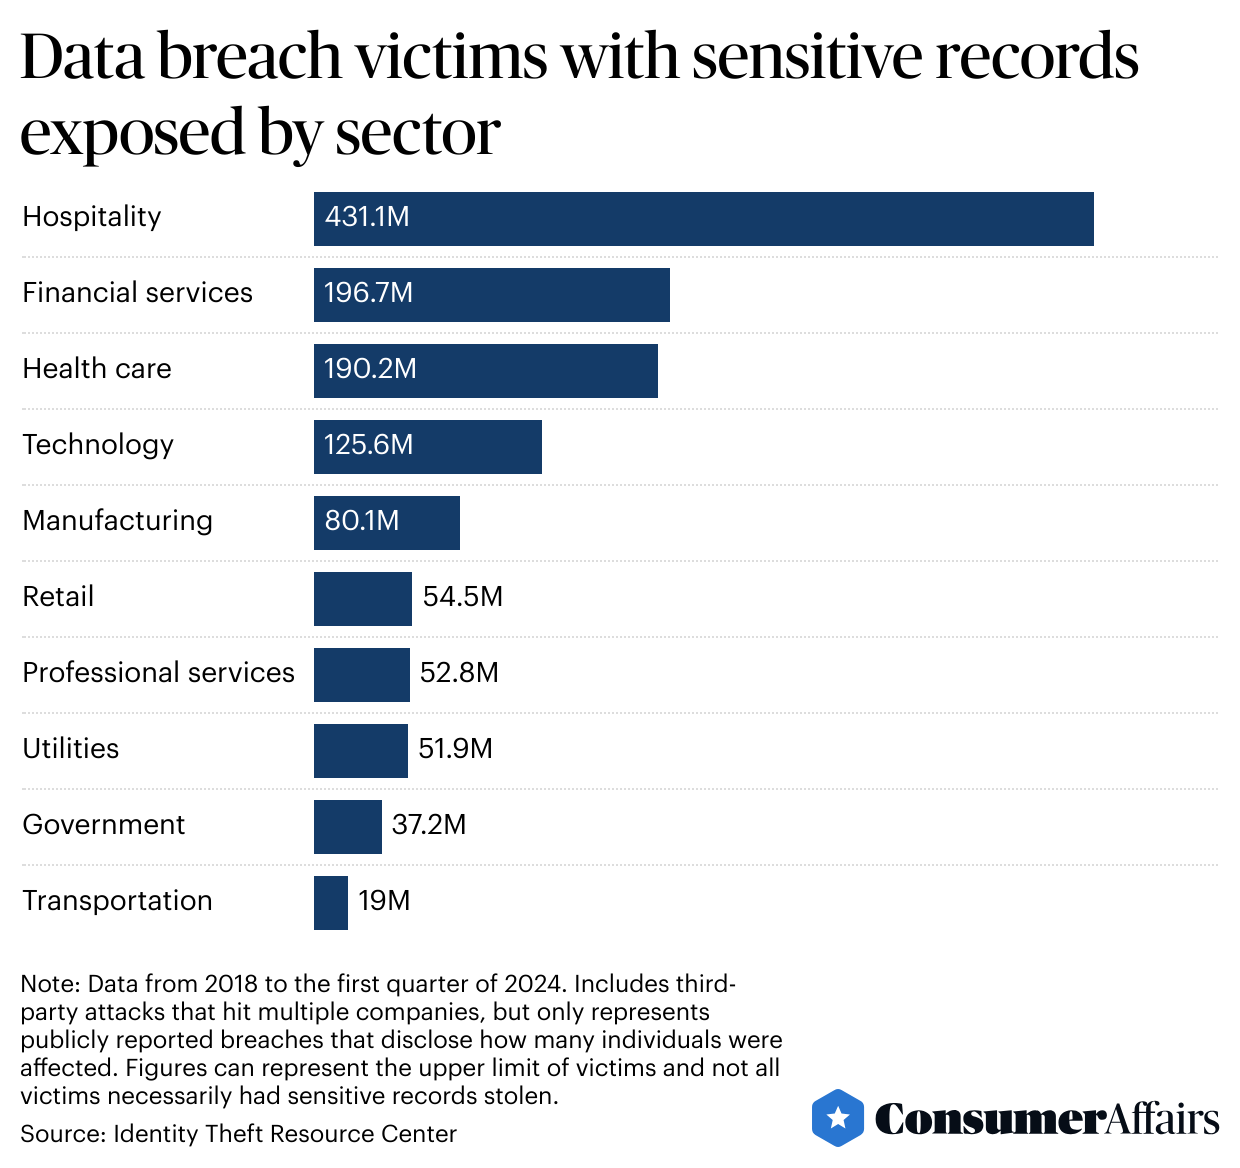 Graph showing “Data breach victims with sensitive records exposed by sector” results.